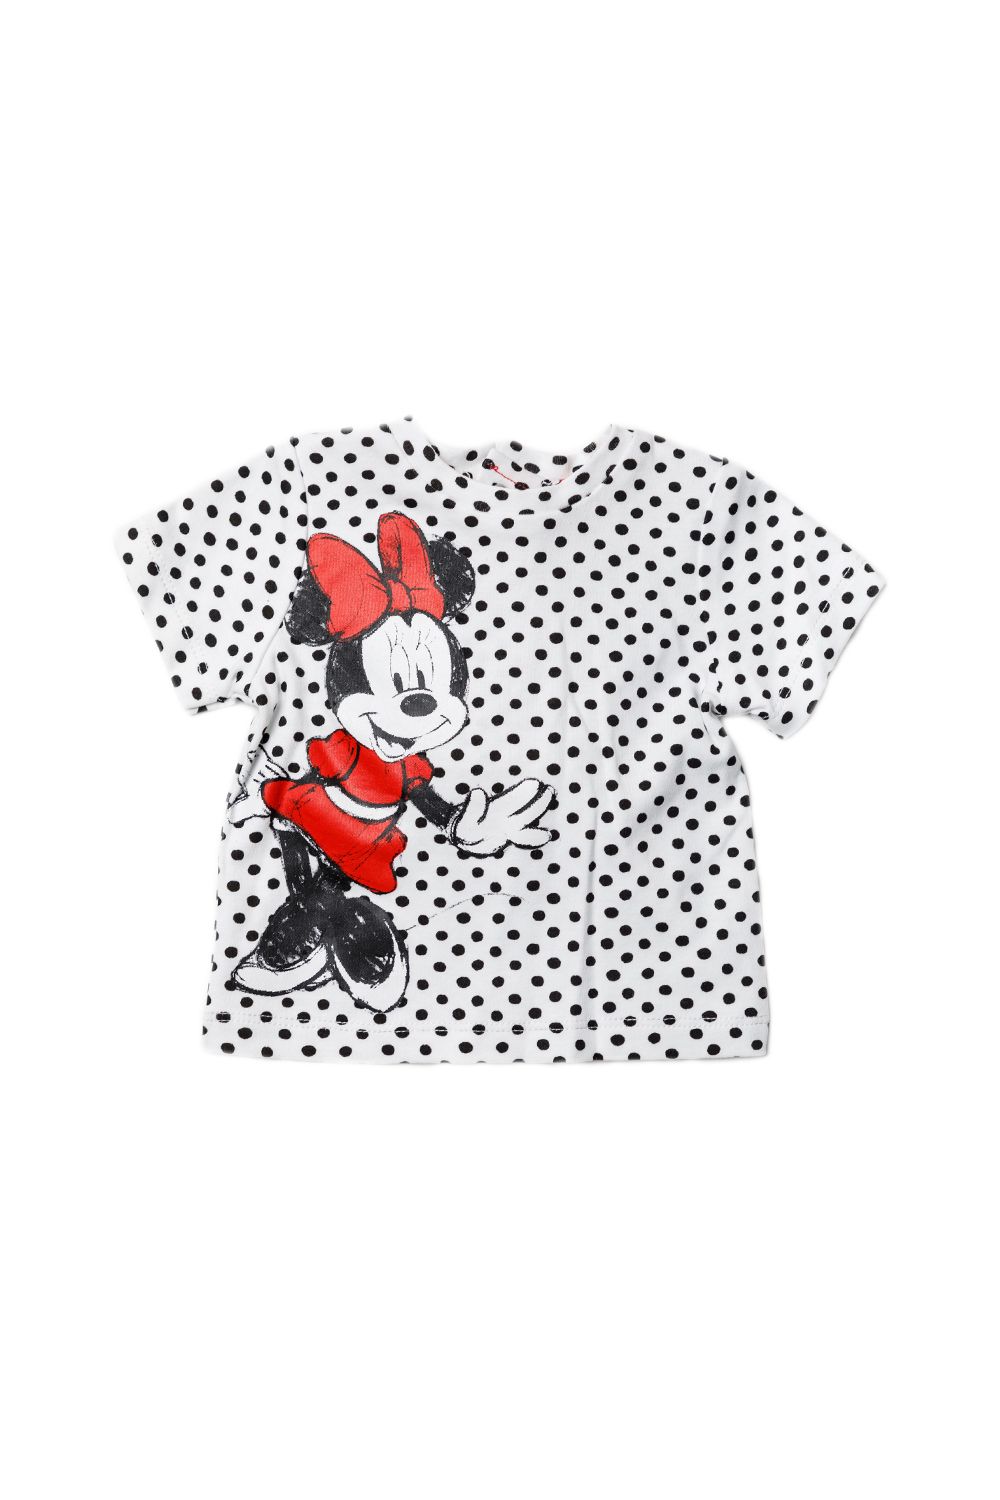 This adorable Disney Baby three-piece set featues a classic Minnie Mouse print. The set includes an all-over, spotted print t-shirt, a pair of shorts, and a matching headband! Each item in the set is cotton and the t-shirt has popper fastenings, keeping your little one comfortable. This would be a lovely gift or new addition to your little ones wardrobe!